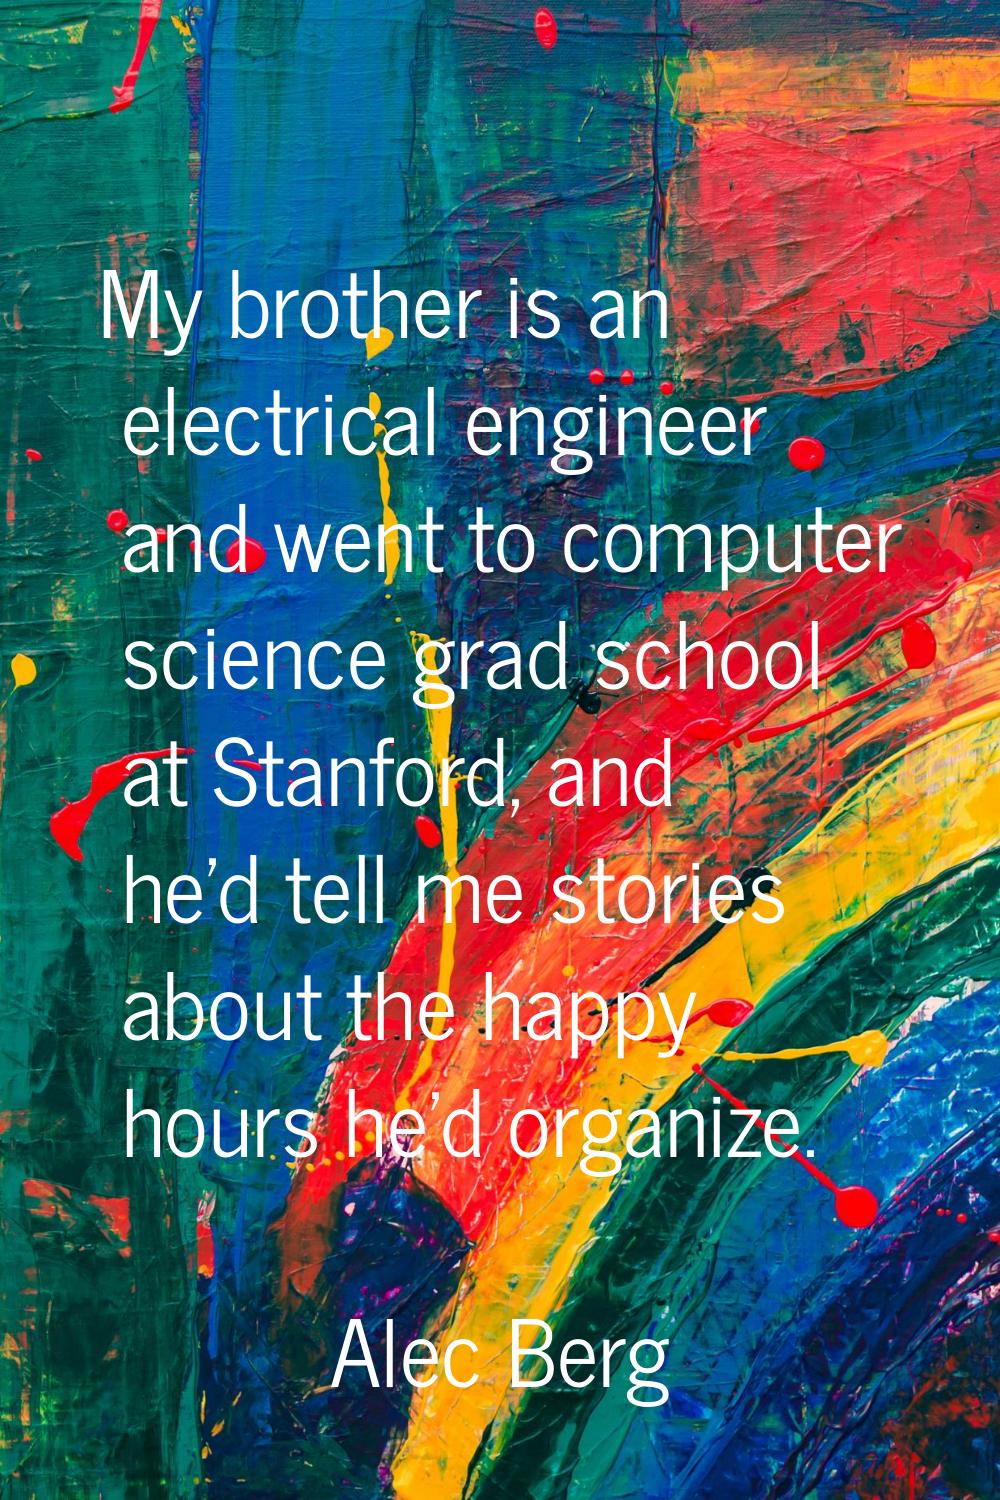 My brother is an electrical engineer and went to computer science grad school at Stanford, and he'd